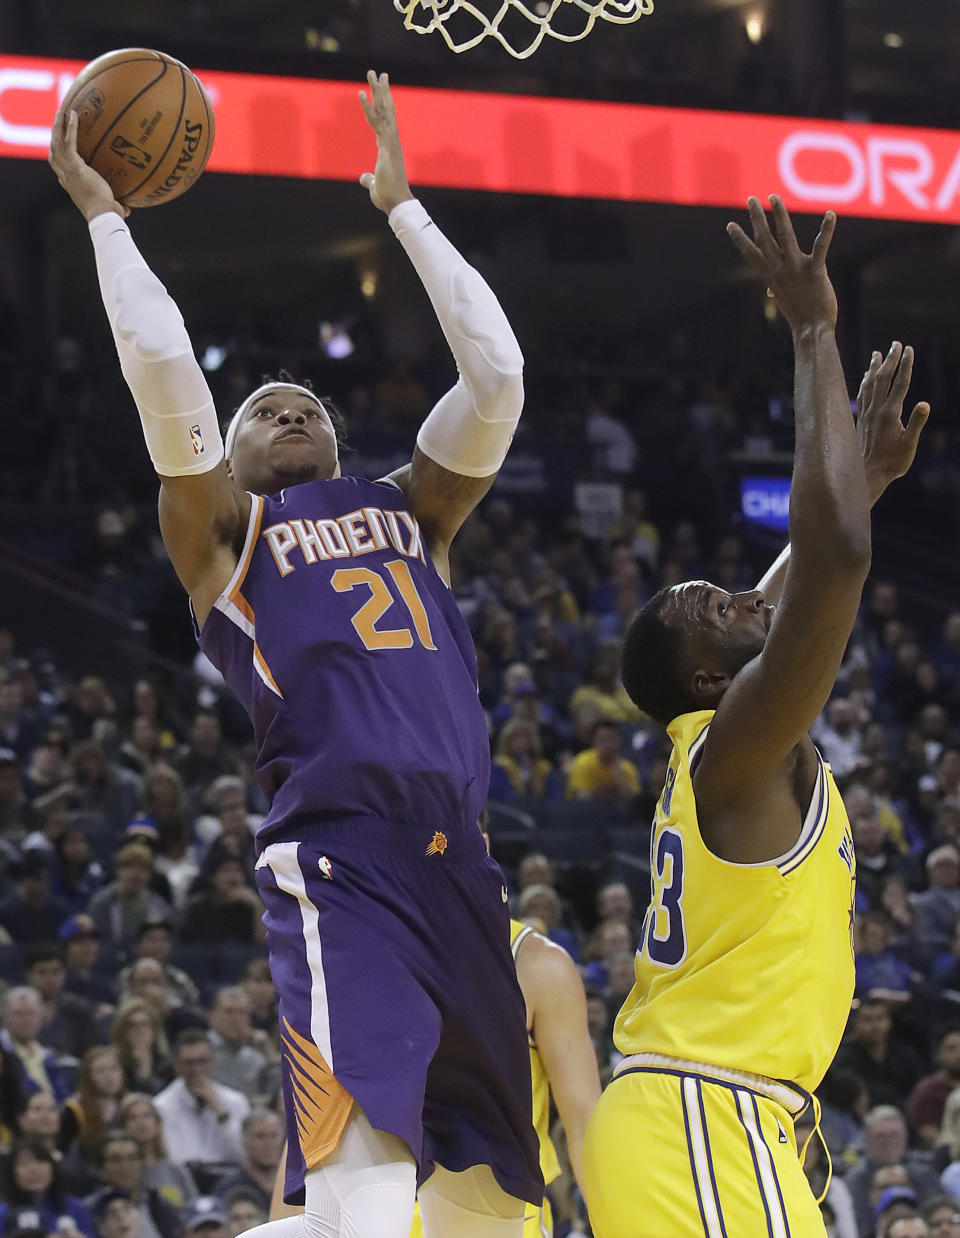 Phoenix Suns forward Richaun Holmes, left, shoots against Golden State Warriors forward Draymond Green, right, during the first half of an NBA basketball game in Oakland, Calif., Sunday, March 10, 2019. (AP Photo/Jeff Chiu)